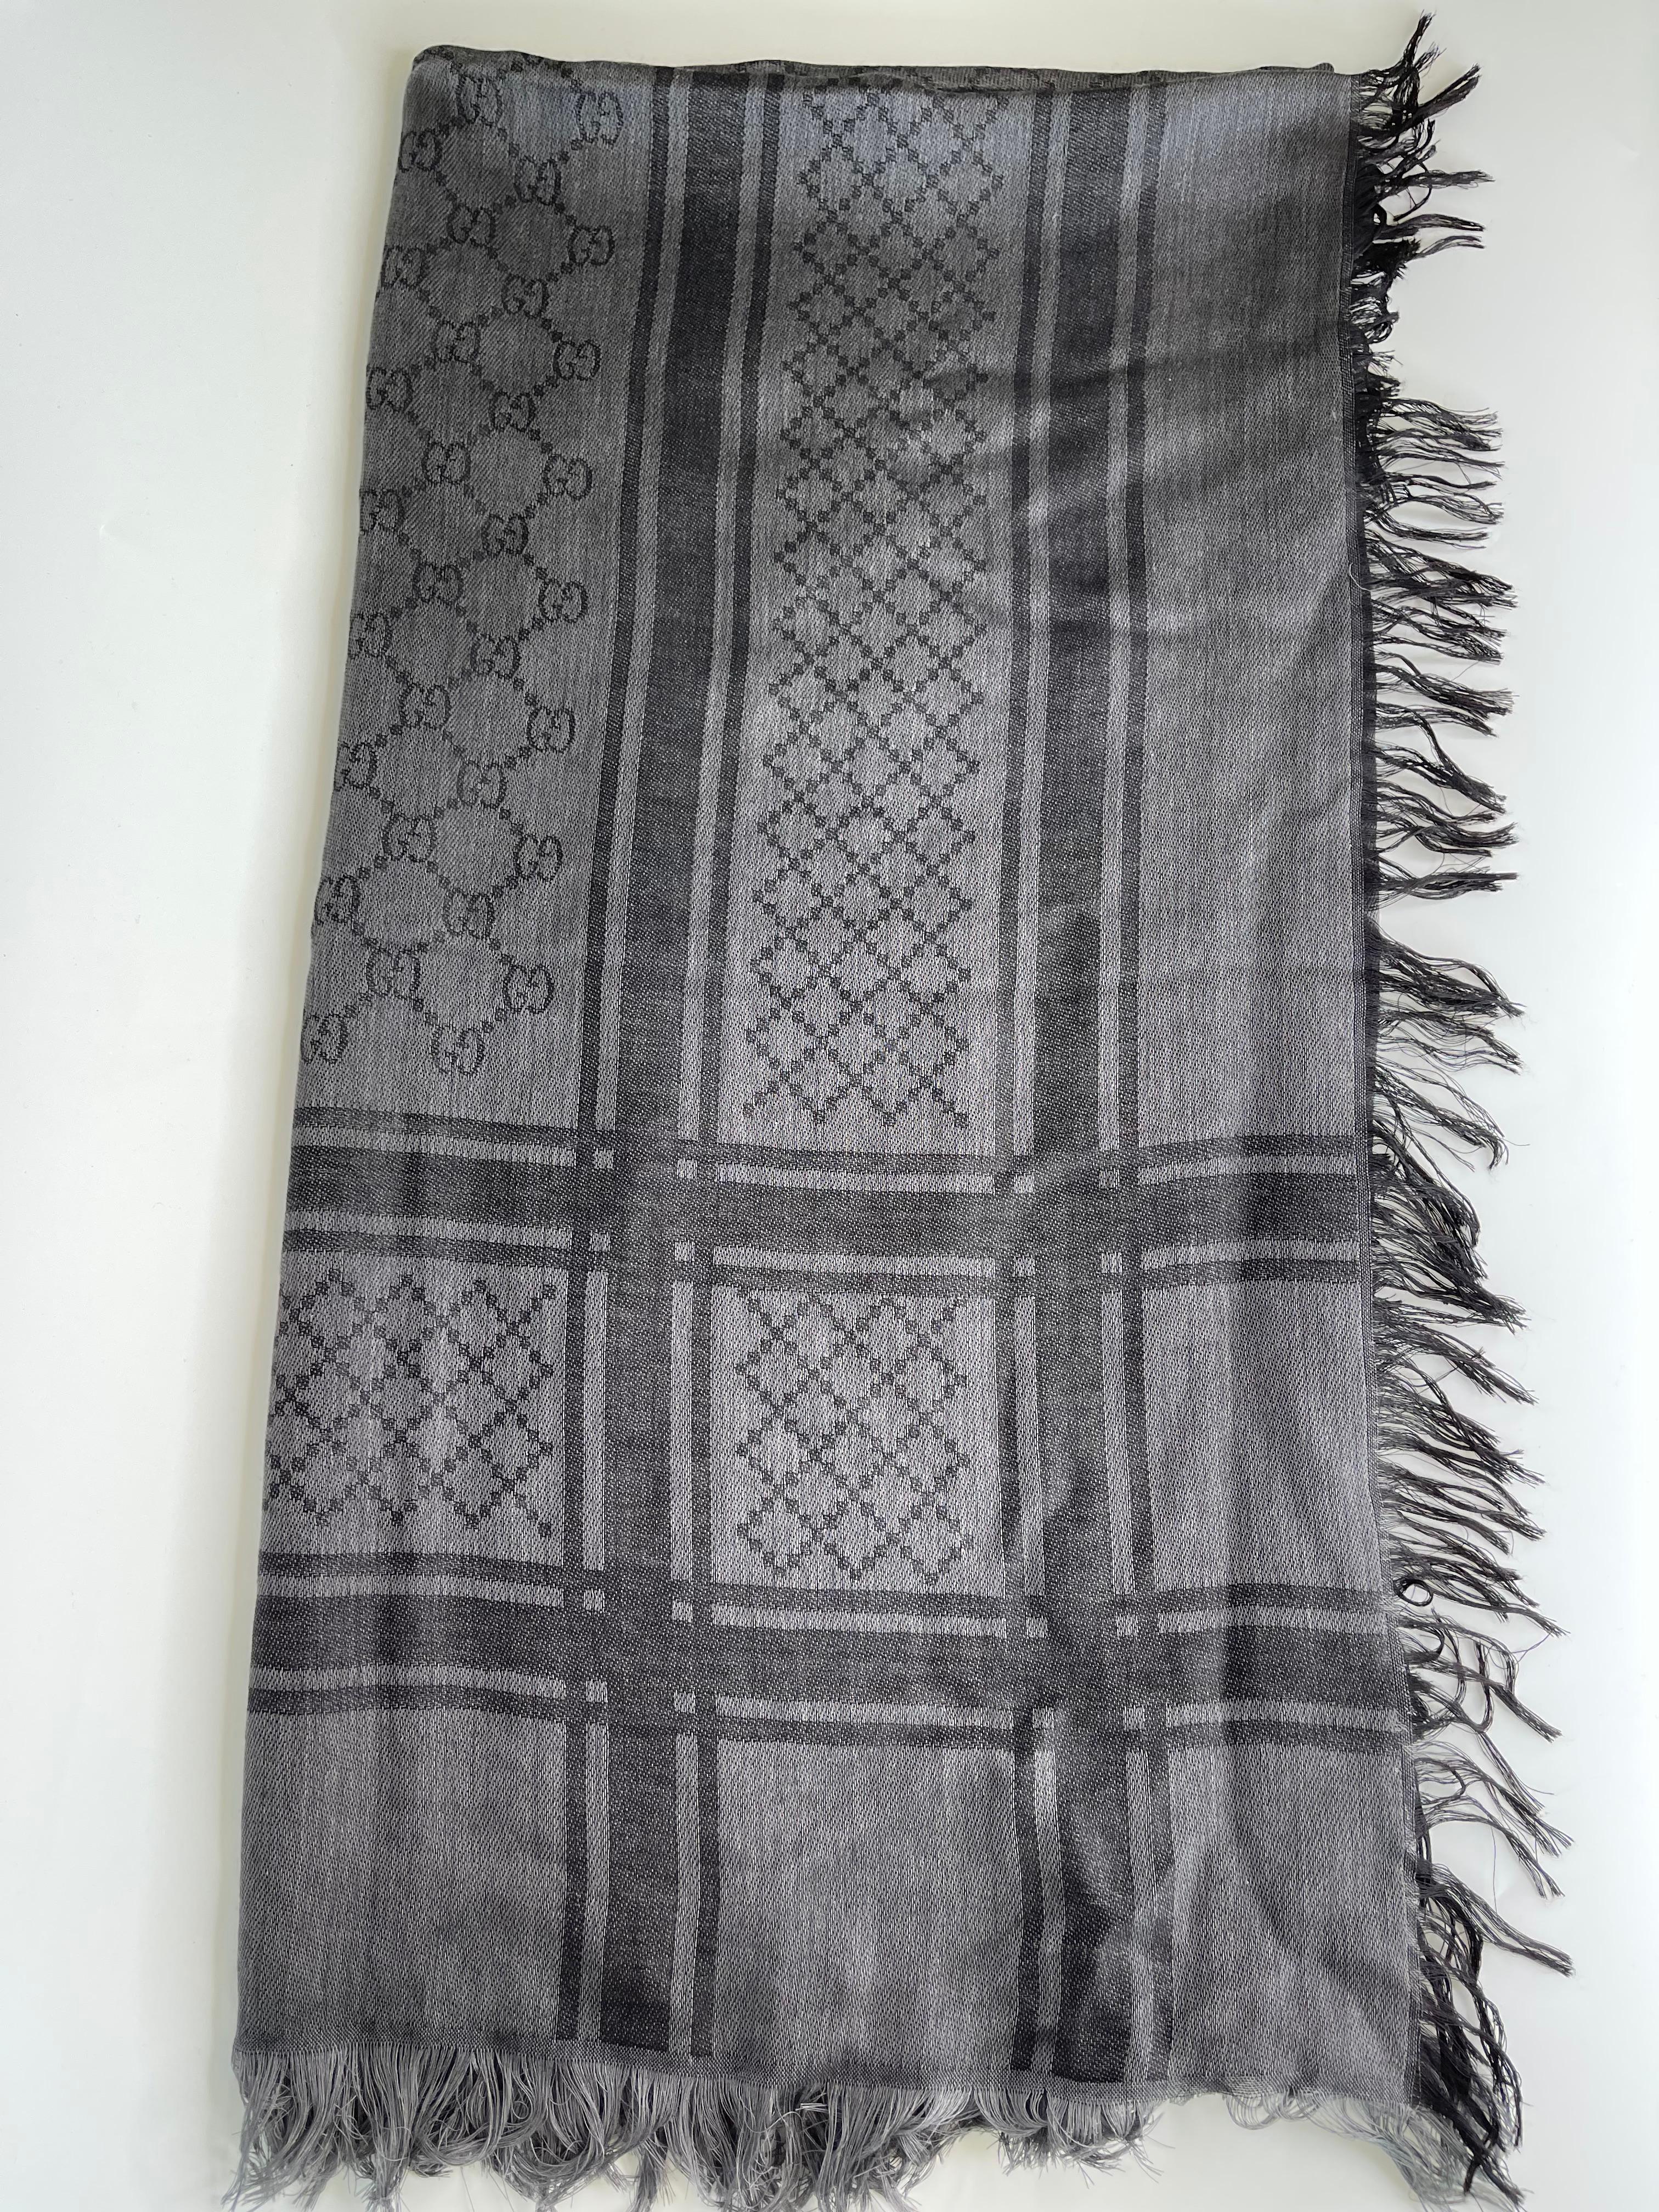 This scarf is finely crafted of 80% wool and 20% silk in a black and grey Gucci GG monogram fabric with a fringe broader.

COLOR: Black and grey
MATERIAL: 80% wool and 20% silk
ITEM CODE: 544615
MEASURES: 140 x 140 cm
COMES WITH: Box & care